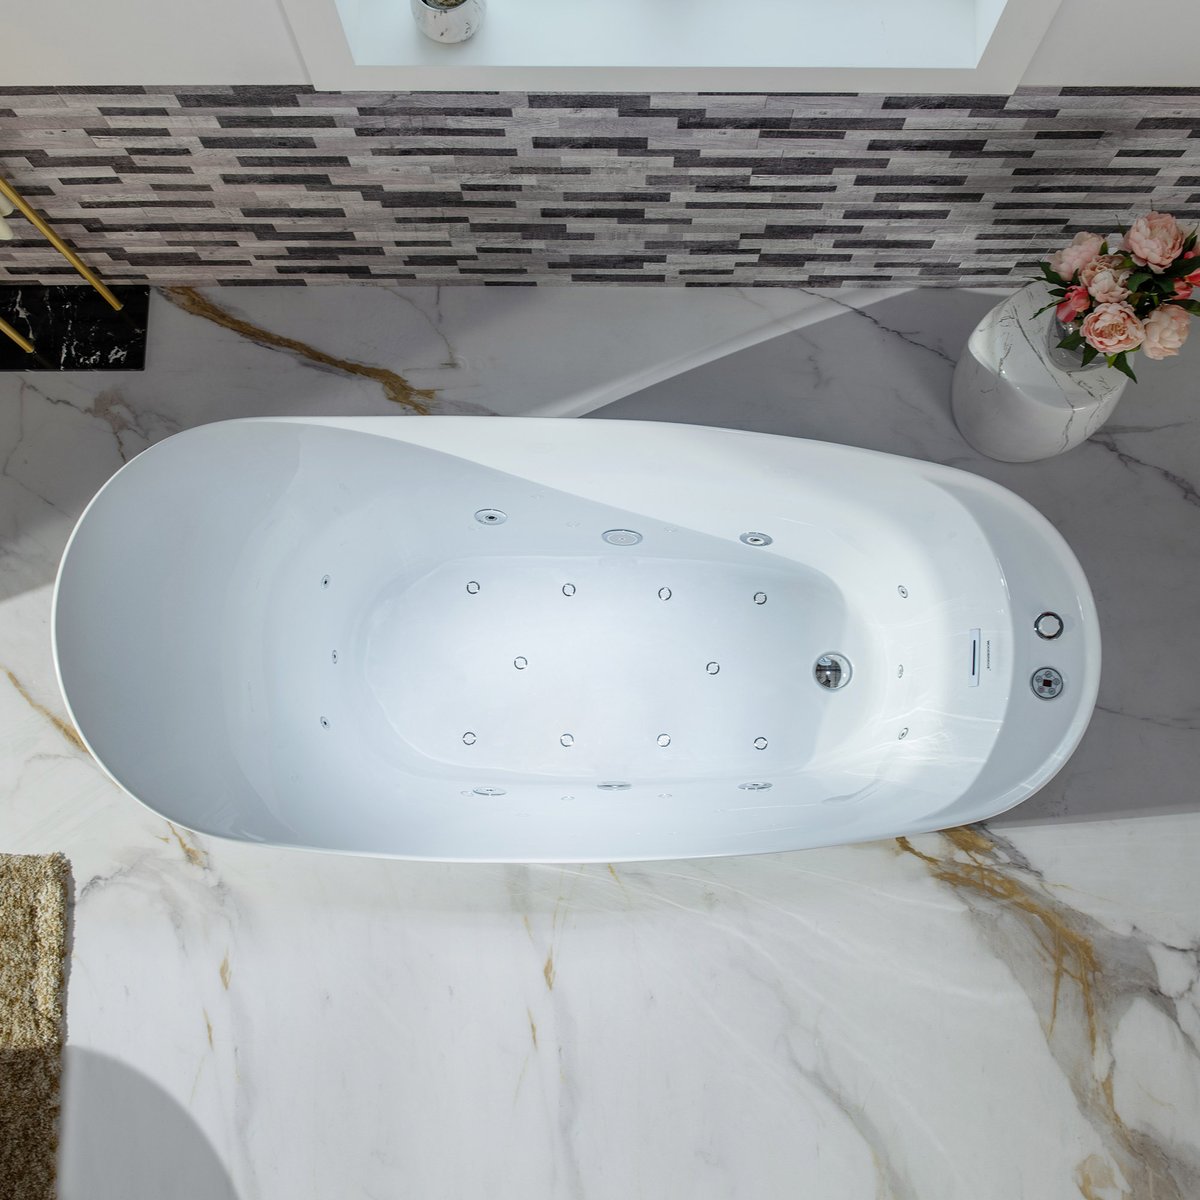 Sink into serenity with our luxurious whirlpool tub, where relaxation meets indulgence. 🌀✨🛀
#whirlpool #homespa #bathtub #spa #homedecor #relaxation #luxurybathroom